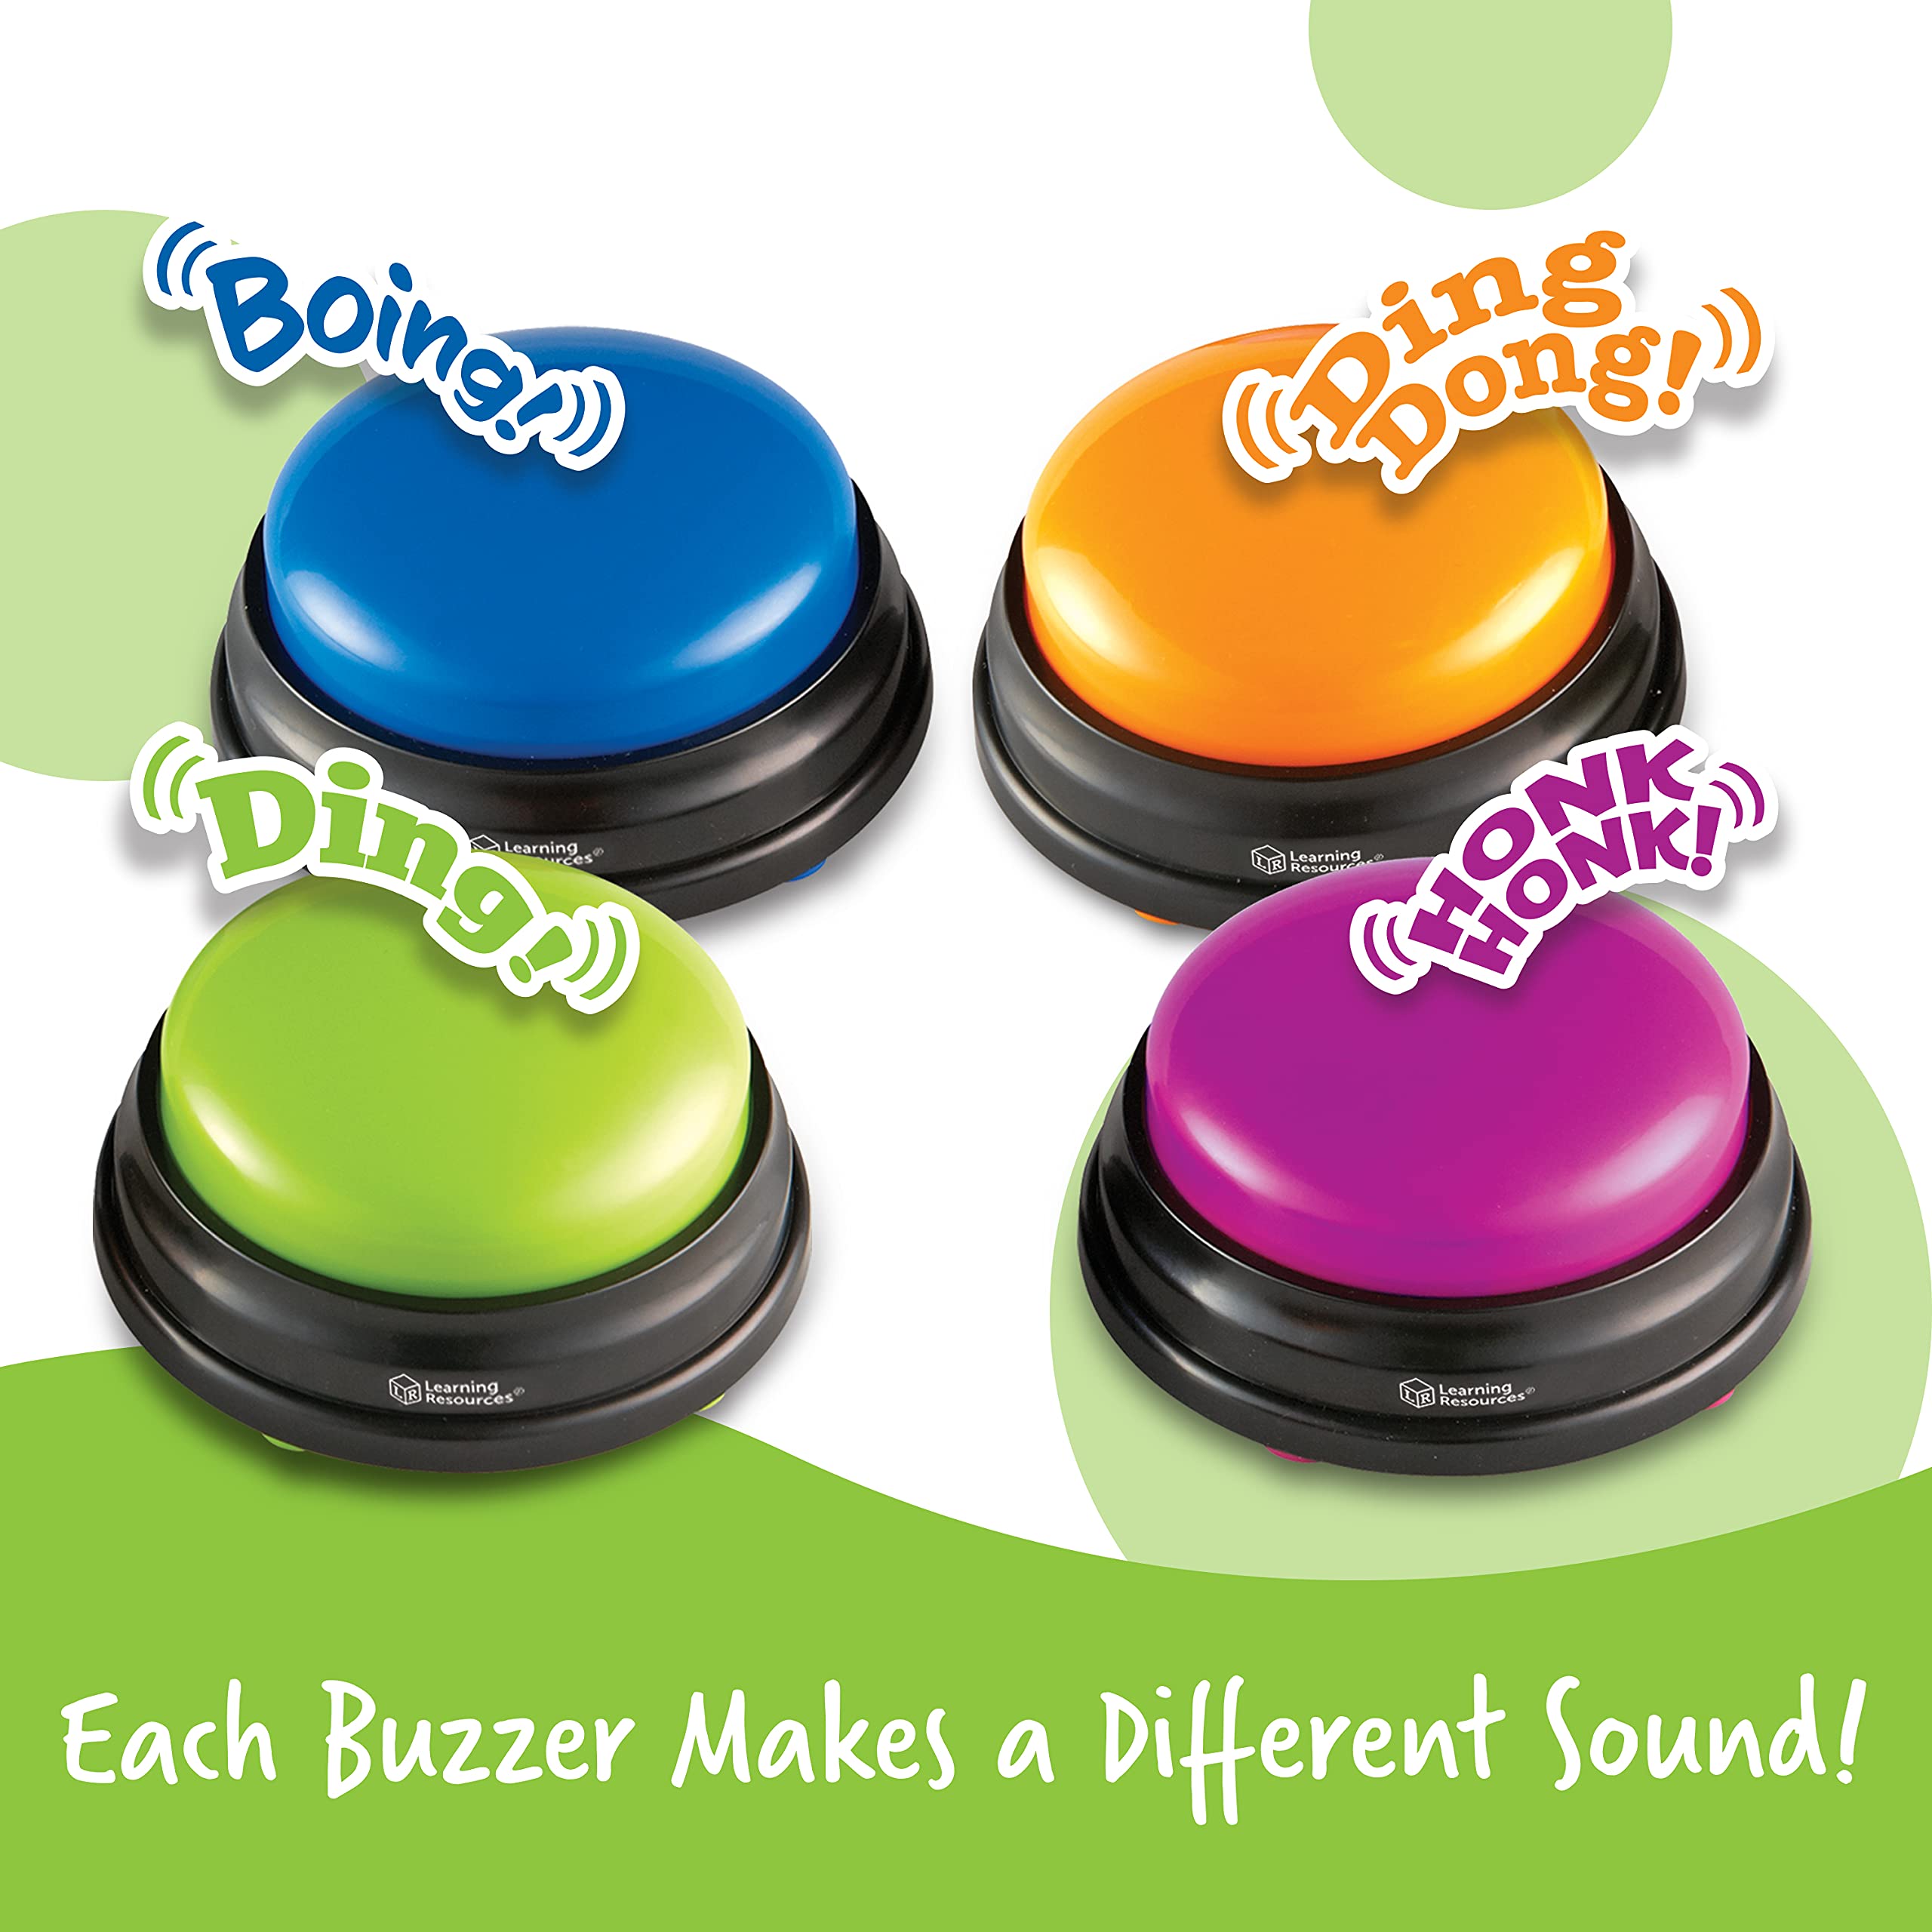 Learning Resources Answer Buzzers - Set of 4, Ages 3+, Assorted Colored Buzzers, Game Show Buzzers, Perfect for Family Game and Trivia Nights,Back to School